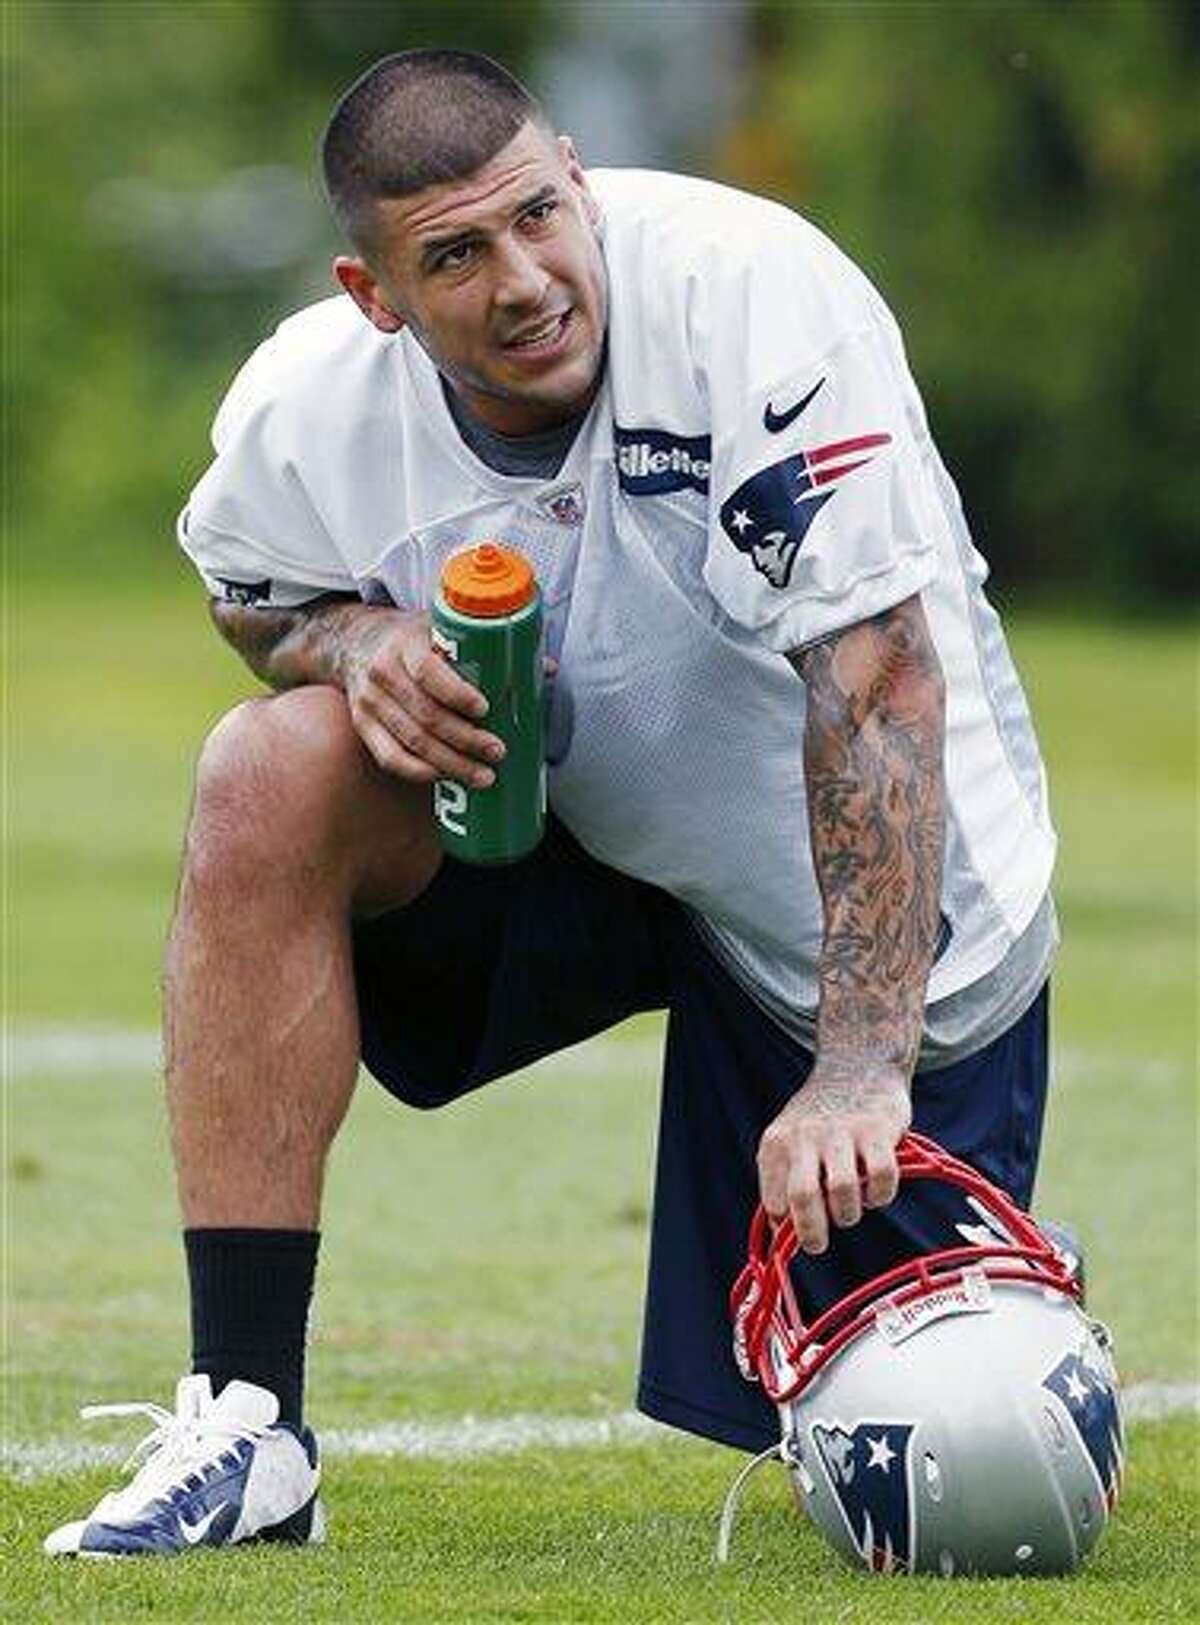 FILE - In this May 29, 2013, file photo, New England Patriots' Aaron Hernandez kneels on the field during NFL football practice in Foxborough, Mass. Hernandez is being sued in South Florida by a man claiming Hernandez shot him in the face after an argument at a strip club. The lawsuit comes as police in New England investigate Hernandez's possible connection to the death of a semipro player. (AP Photo/Michael Dwyer, File)